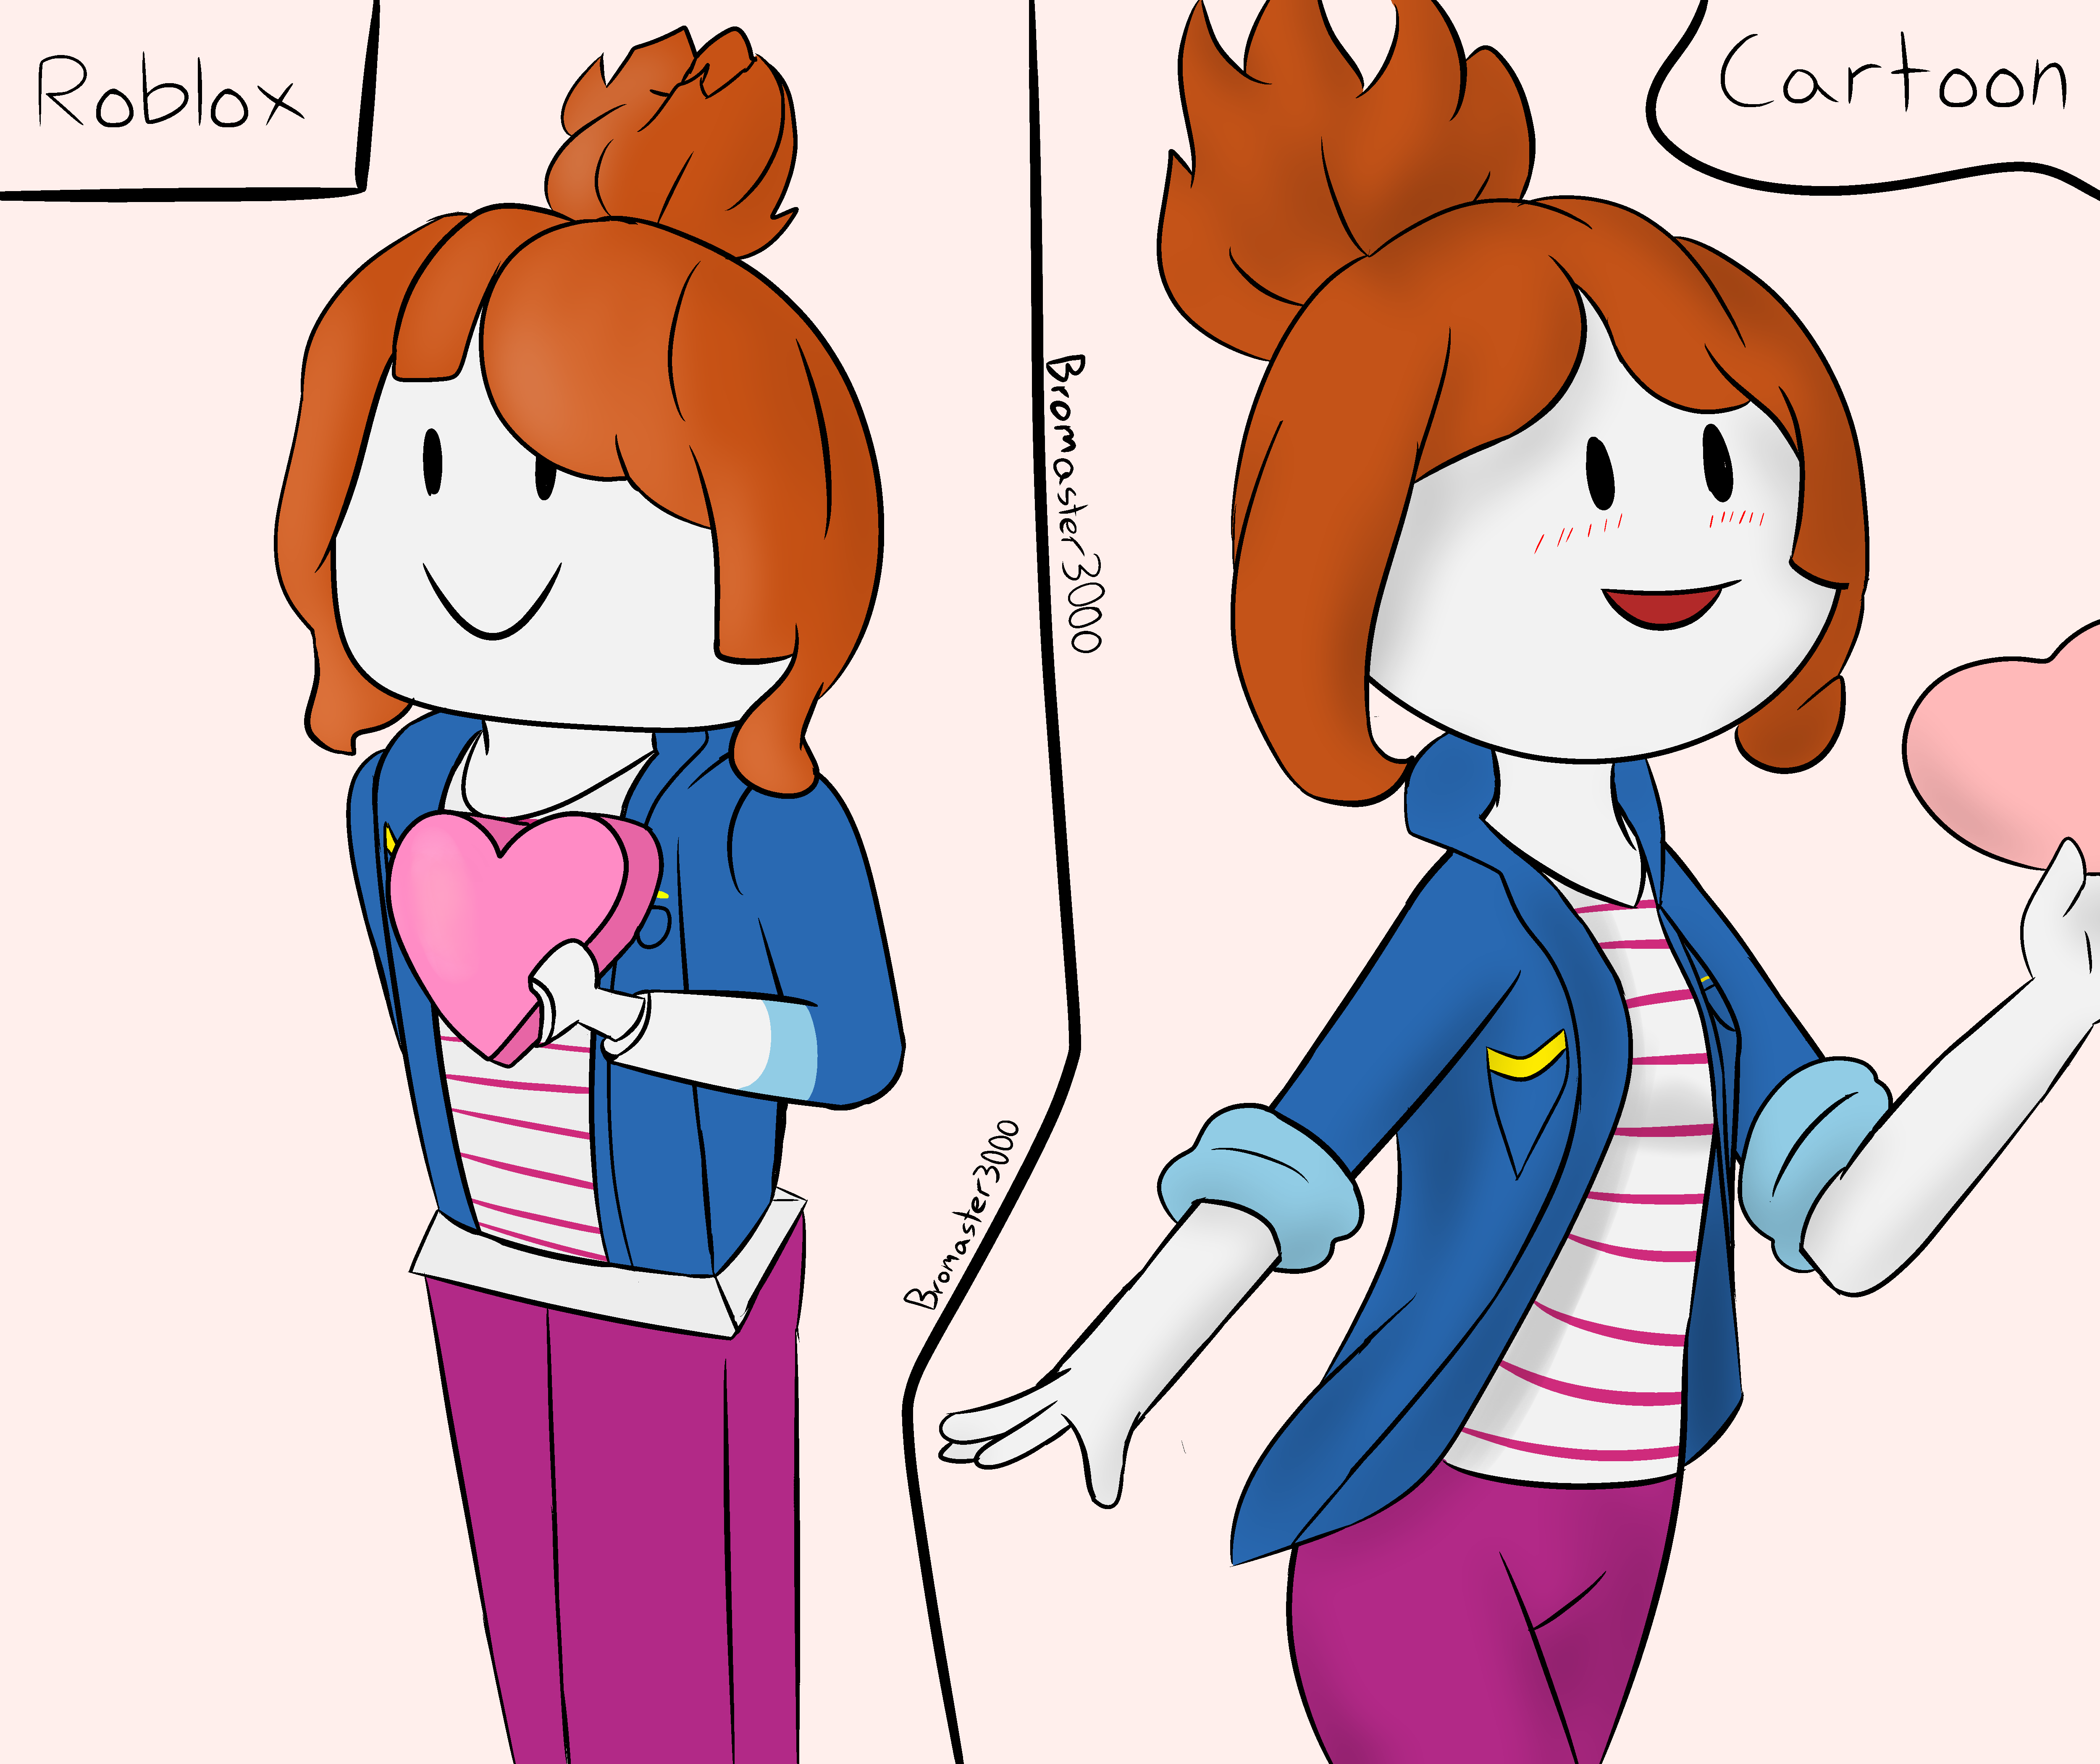 Roblox Style Vs Cartoon Style By Bromaster3000 On Deviantart - roblox bacon girl png